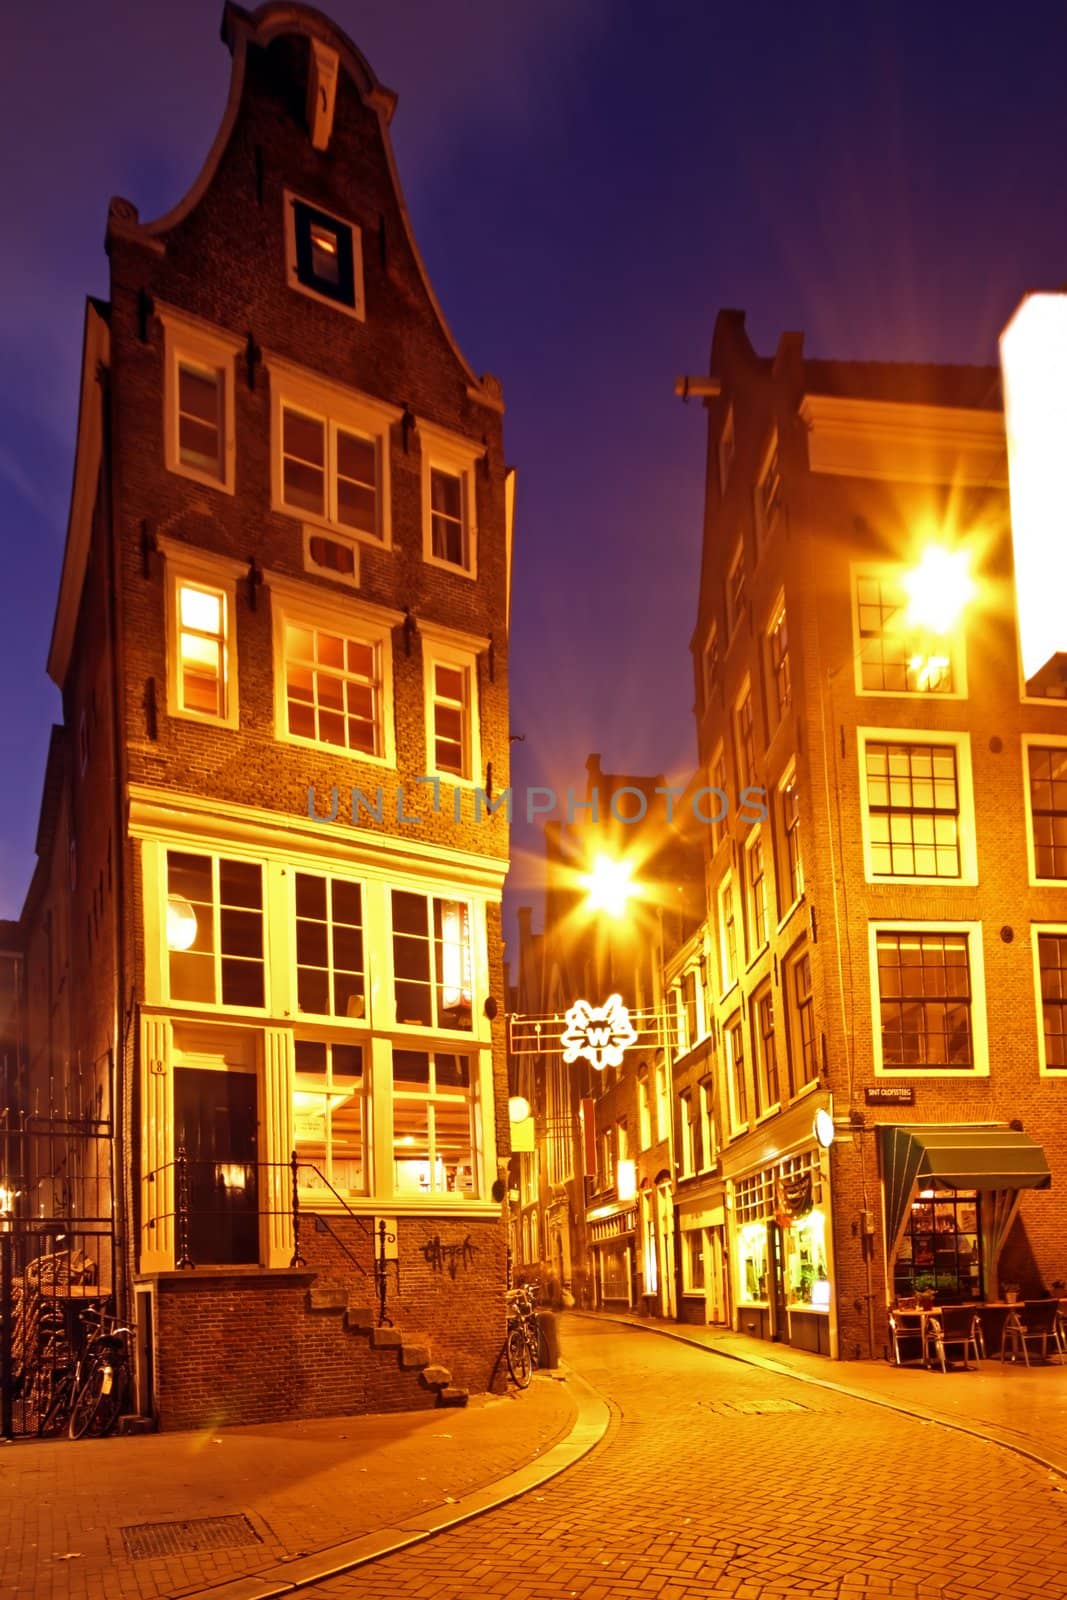 Amsterdam houses by night in the Netherlands by devy